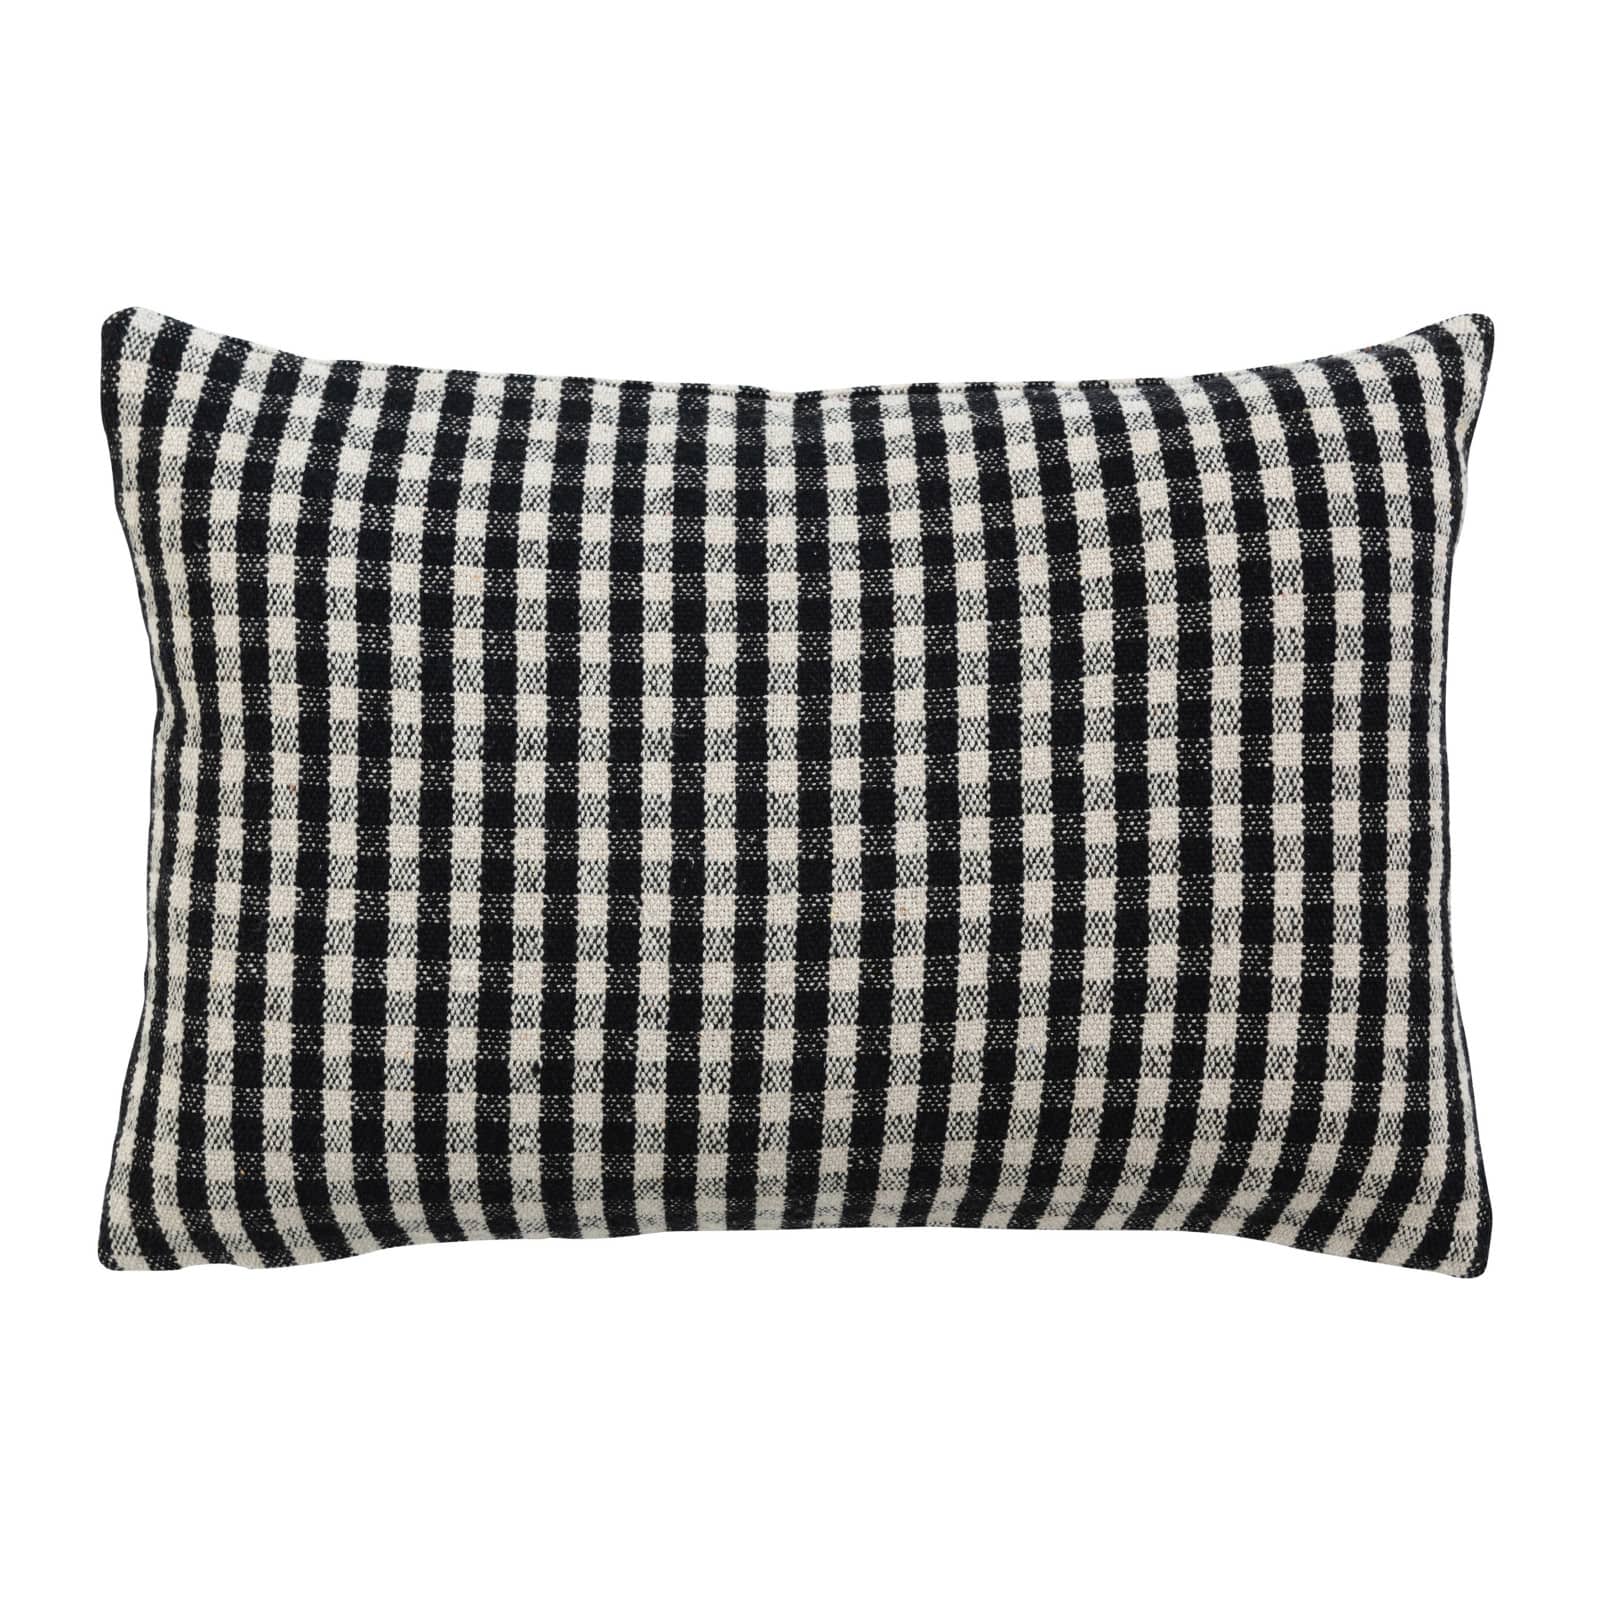 Gingham Woven Recycled Cotton Blend Lumbar Pillow Cover